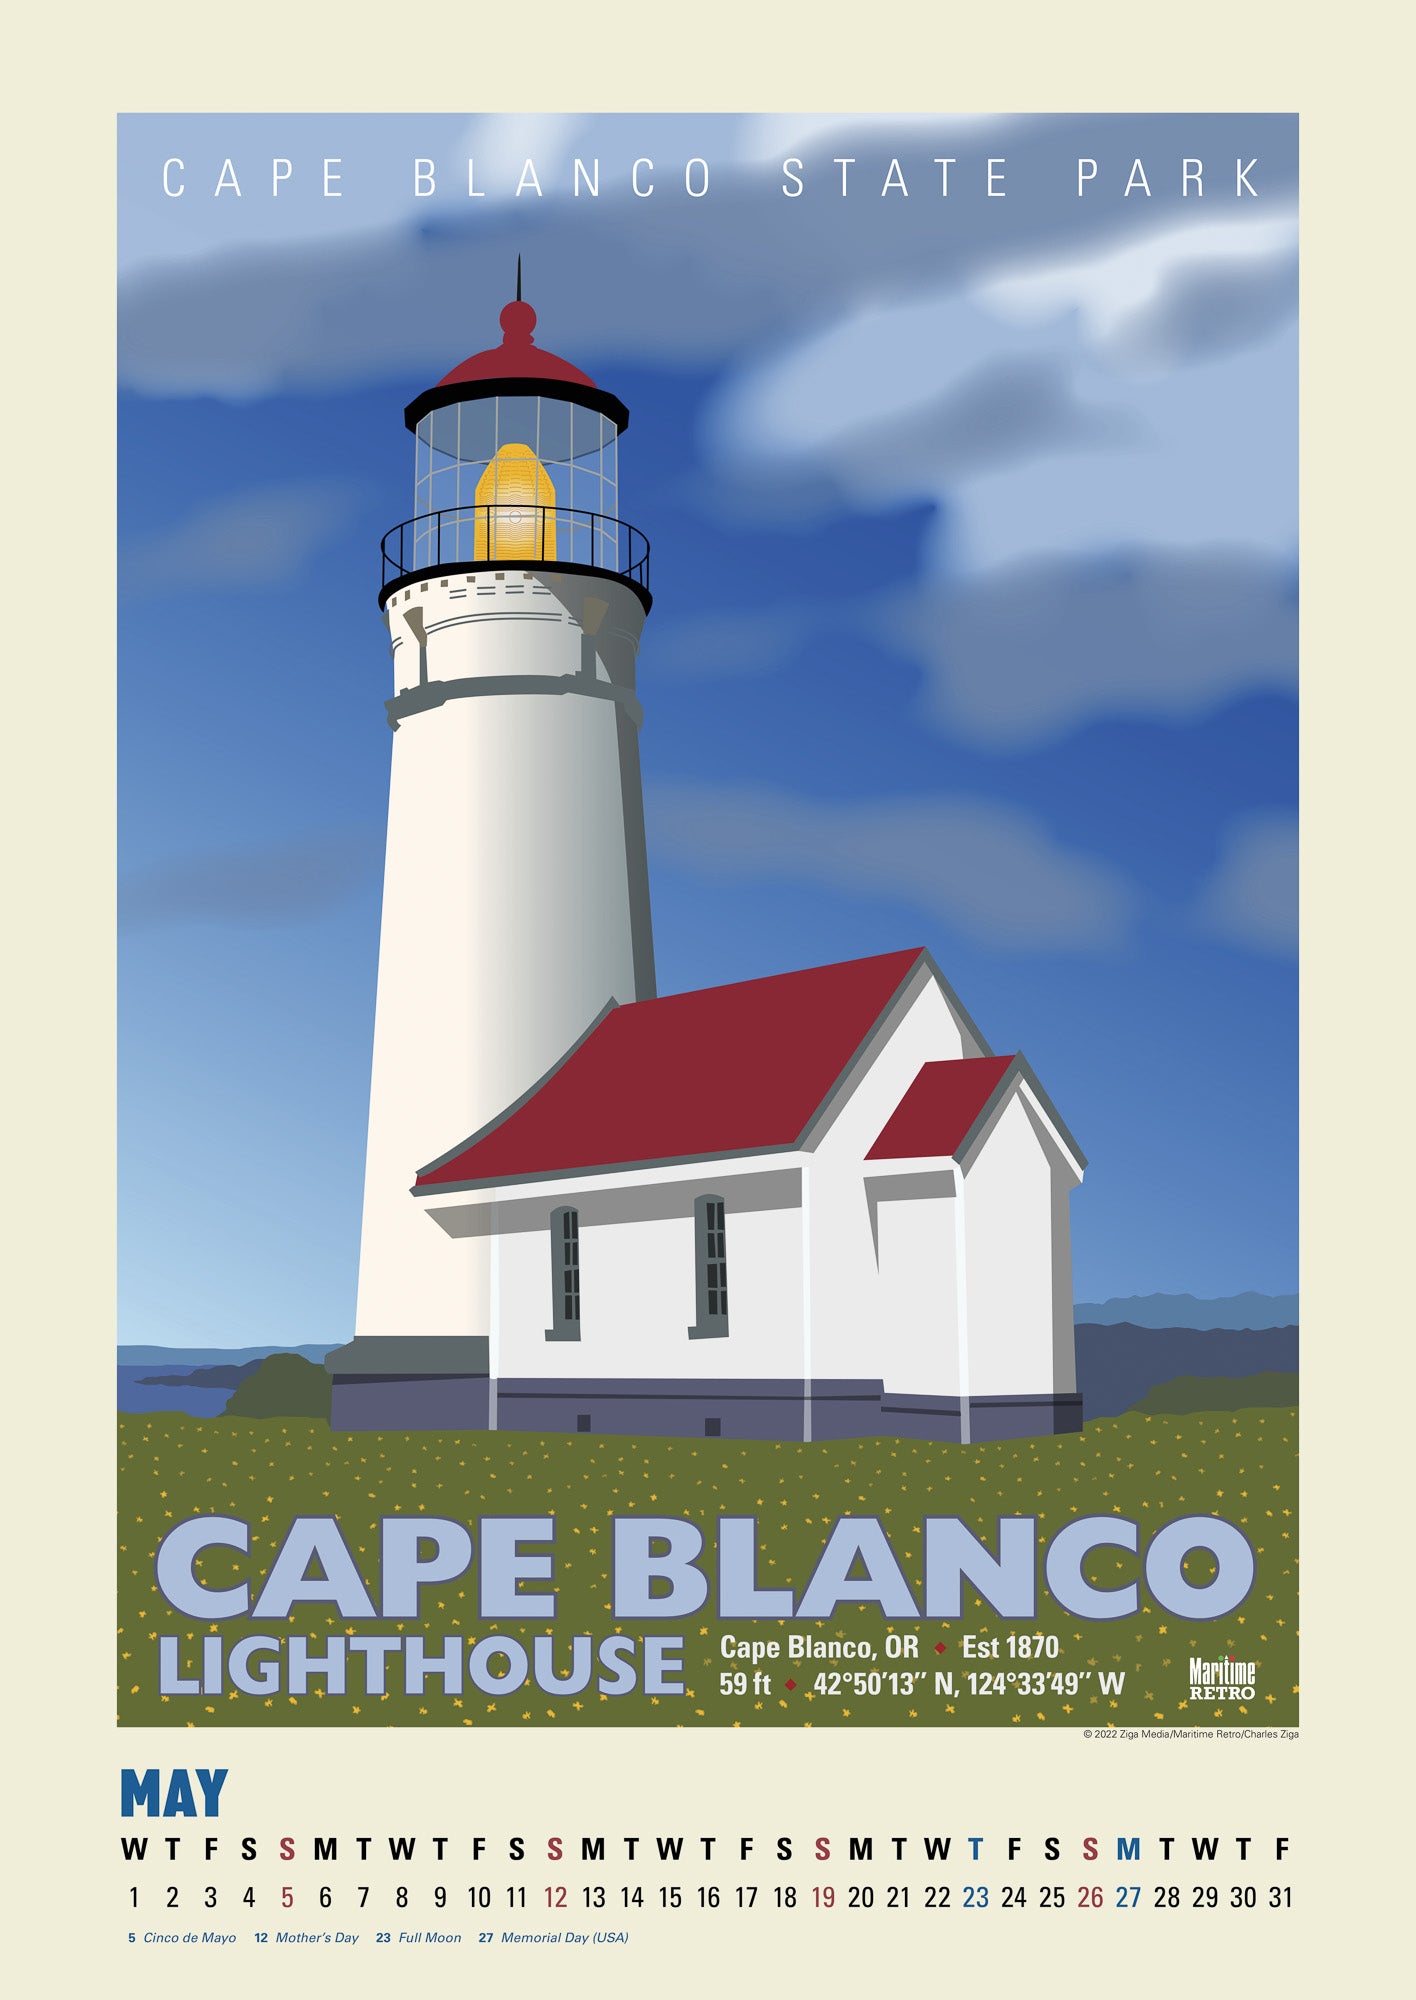 Pacific Coast Lighthouses Oversize Wall Calendar 2024, 13.38'' x 19'' Spiral Bound with Hanger